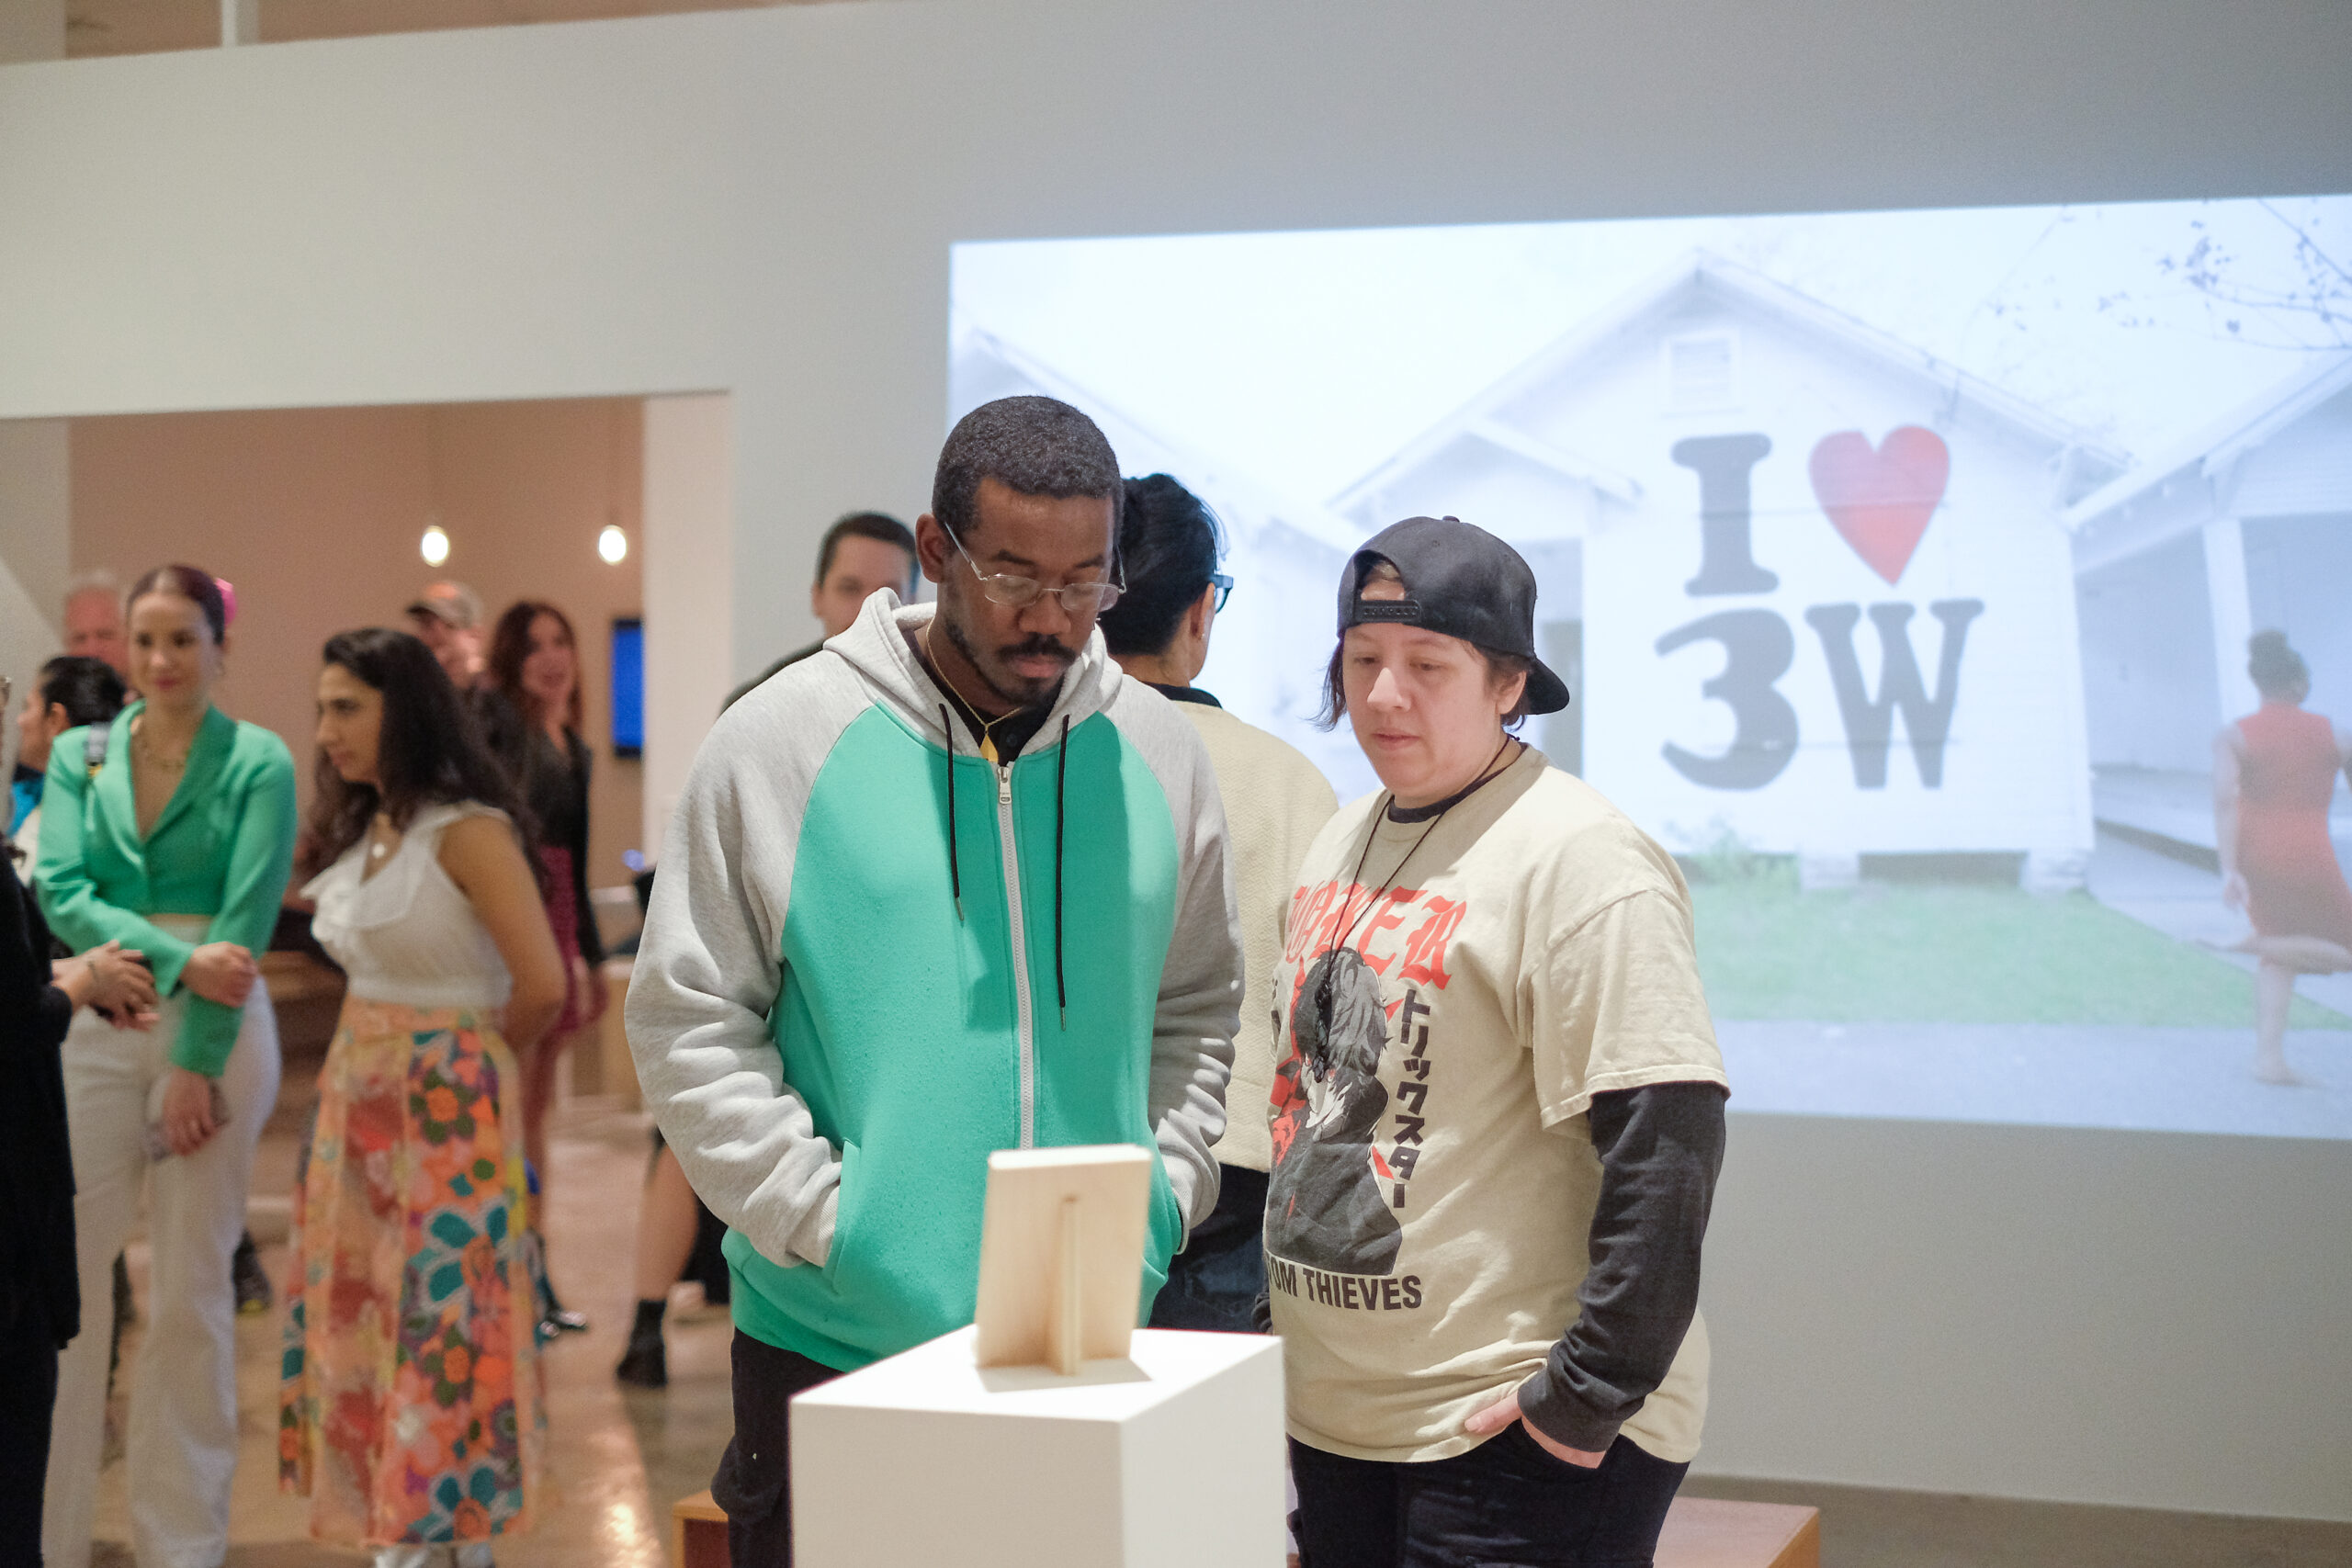 Two people in a gallery looking at a small frame placed on a pedestal. A projection is on the wall in the background, showing a White House with I (heart) 3W on it.